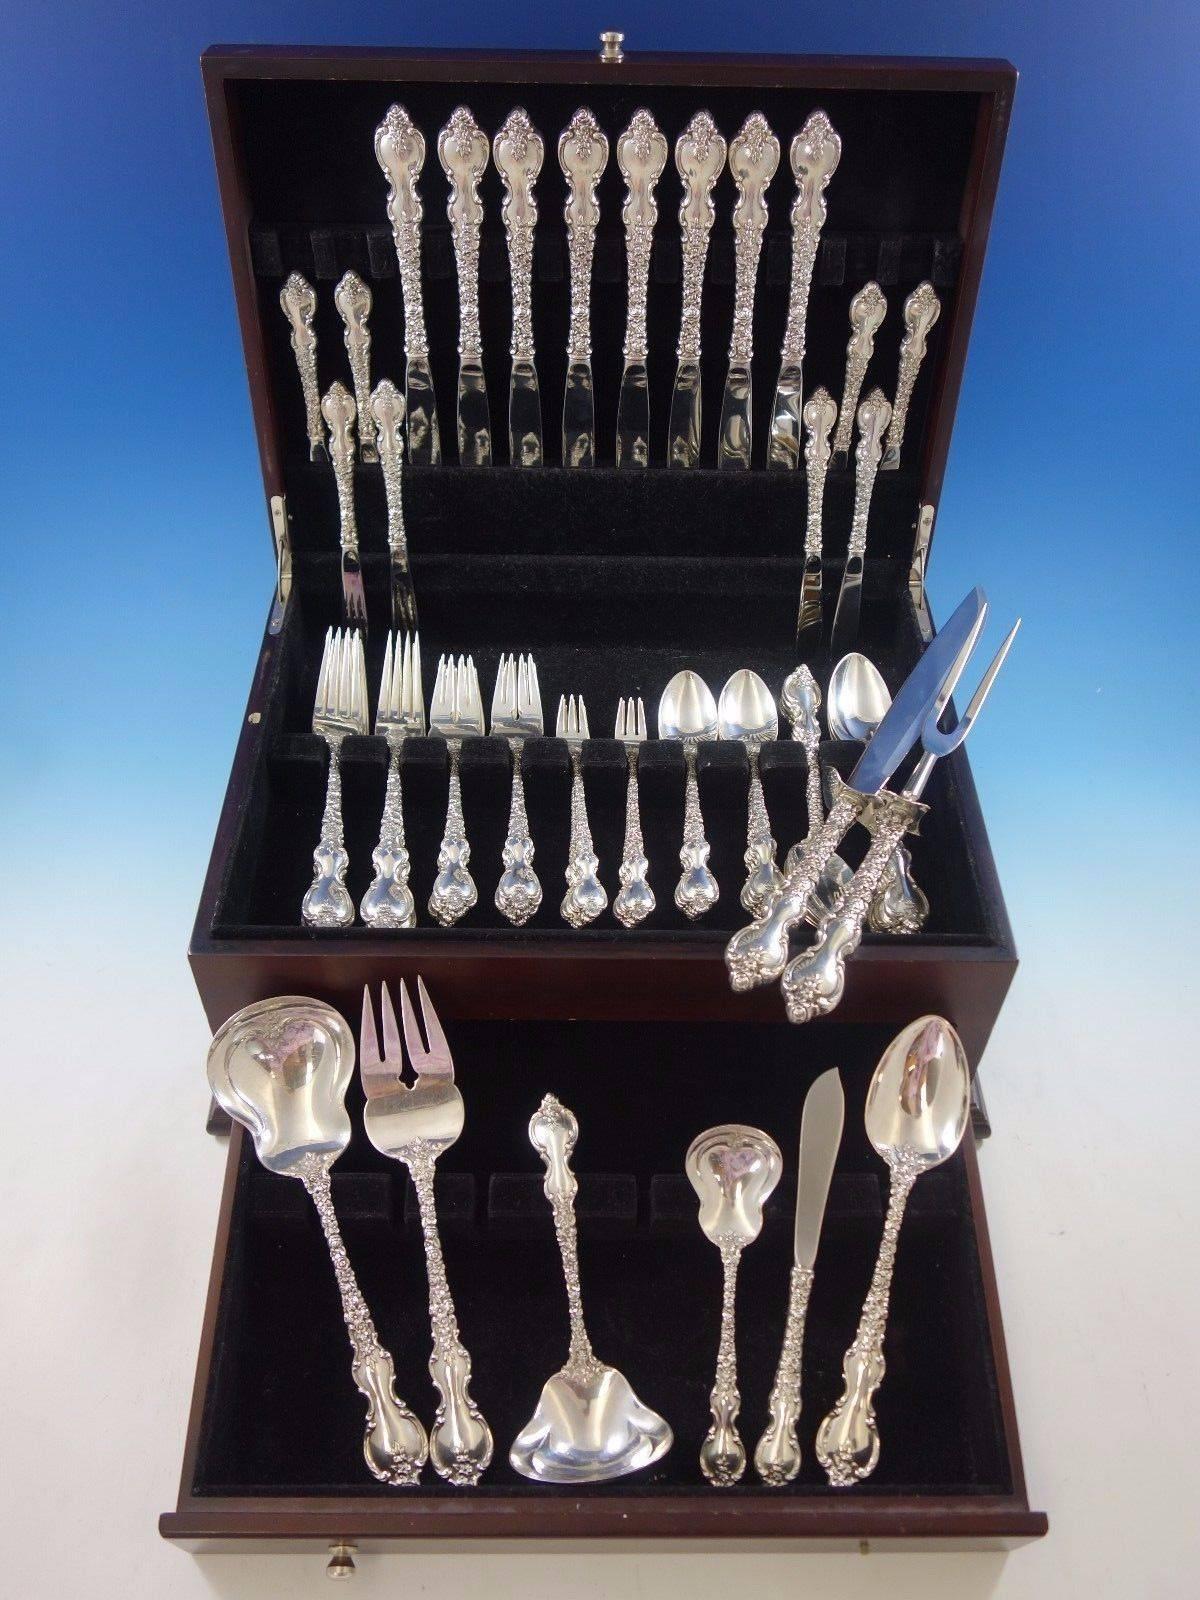 Du Barry by International sterling silver dinner size flatware set, 63 pieces. This set includes: 

Eight dinner size knives, 9 3/4